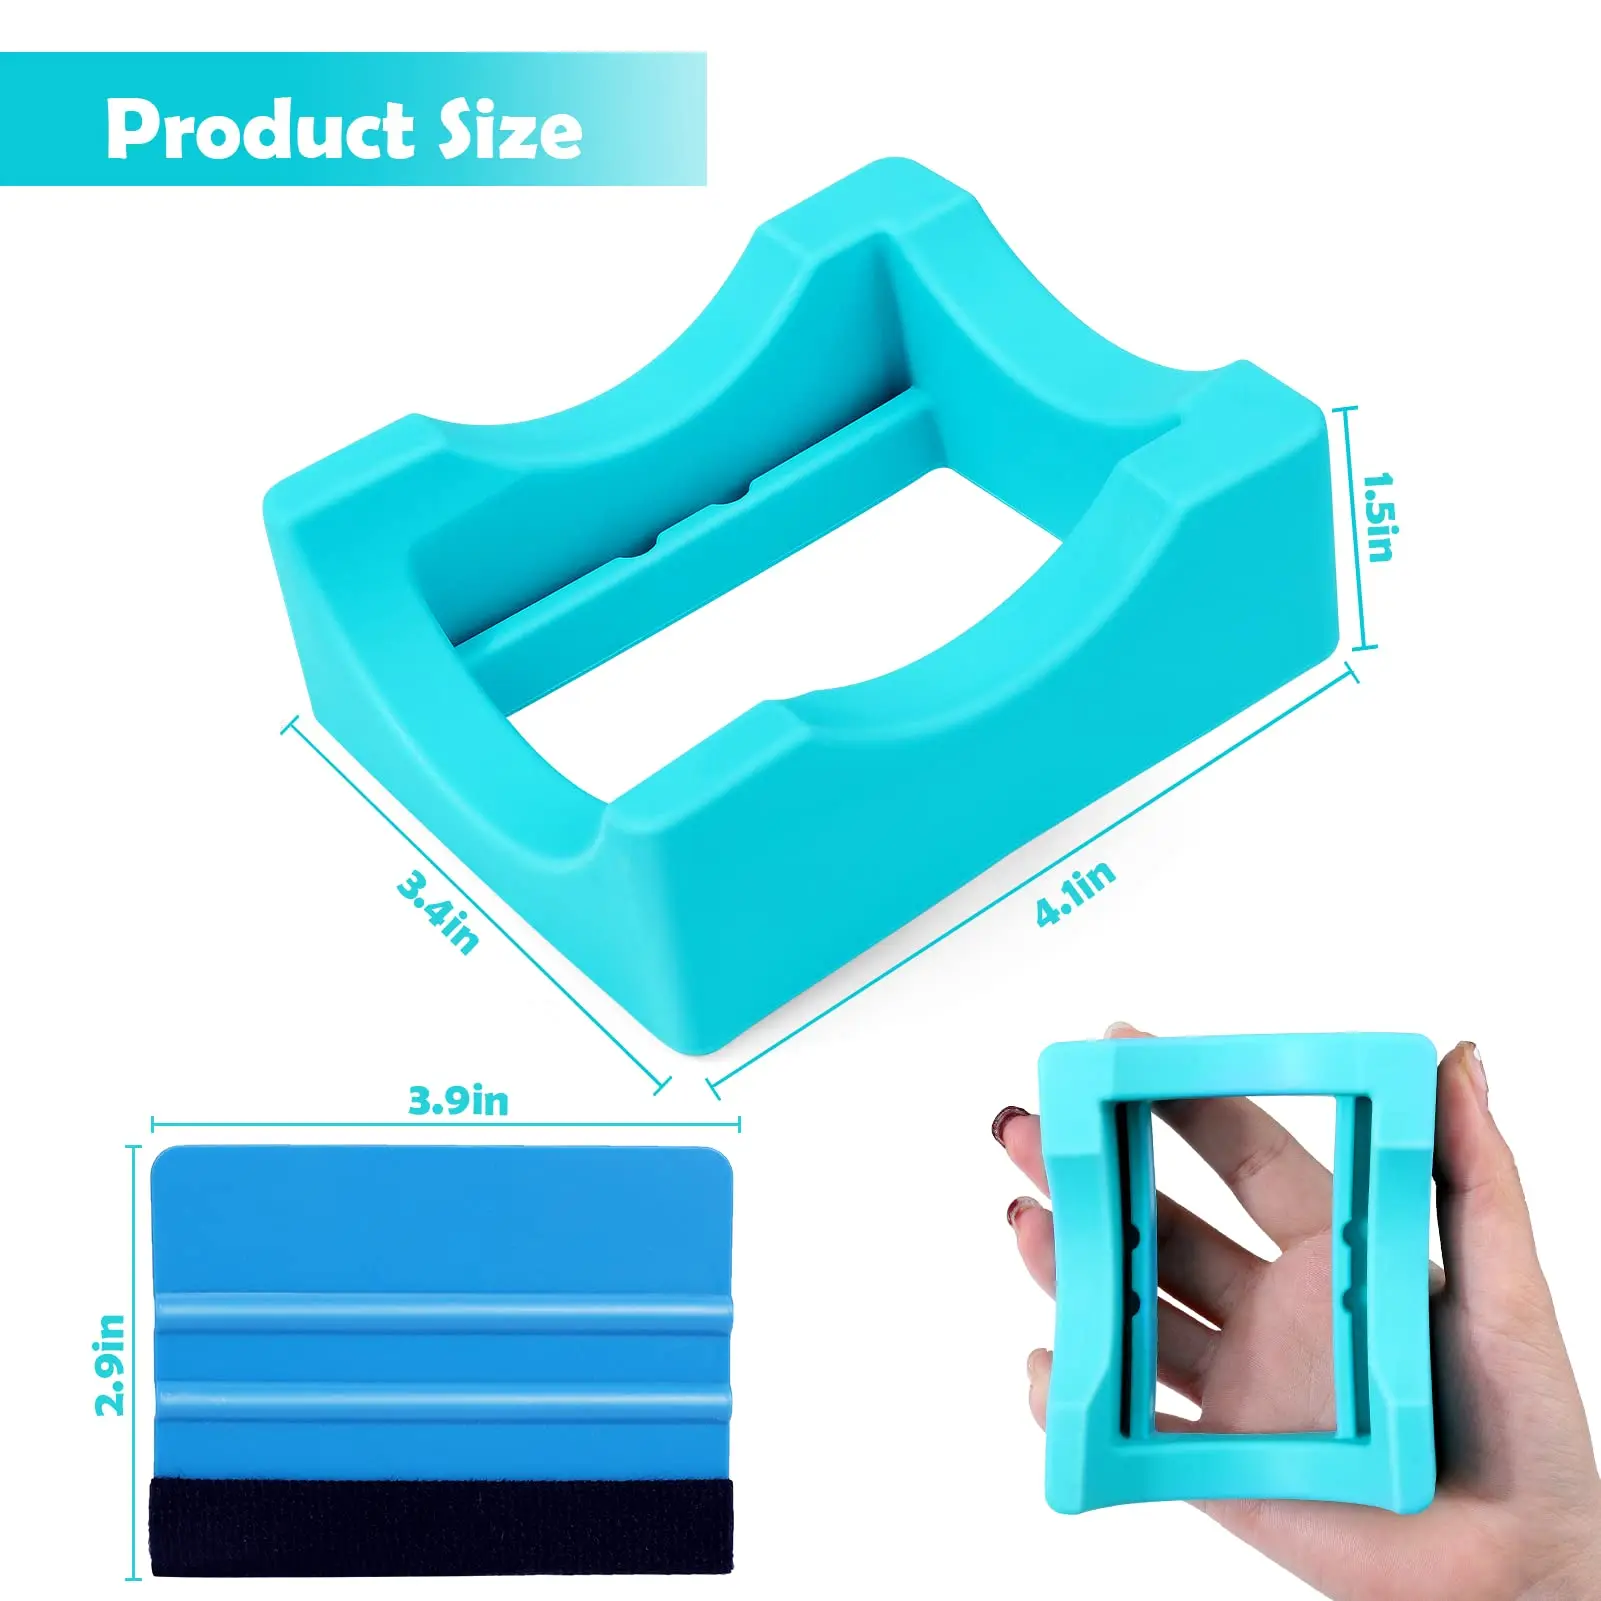 New Cup Holder For Non Slip Silicone Glass Cup Holder Home Office Storage Solutions Desk Organizer Non-slip Silicone Cup Holder images - 6